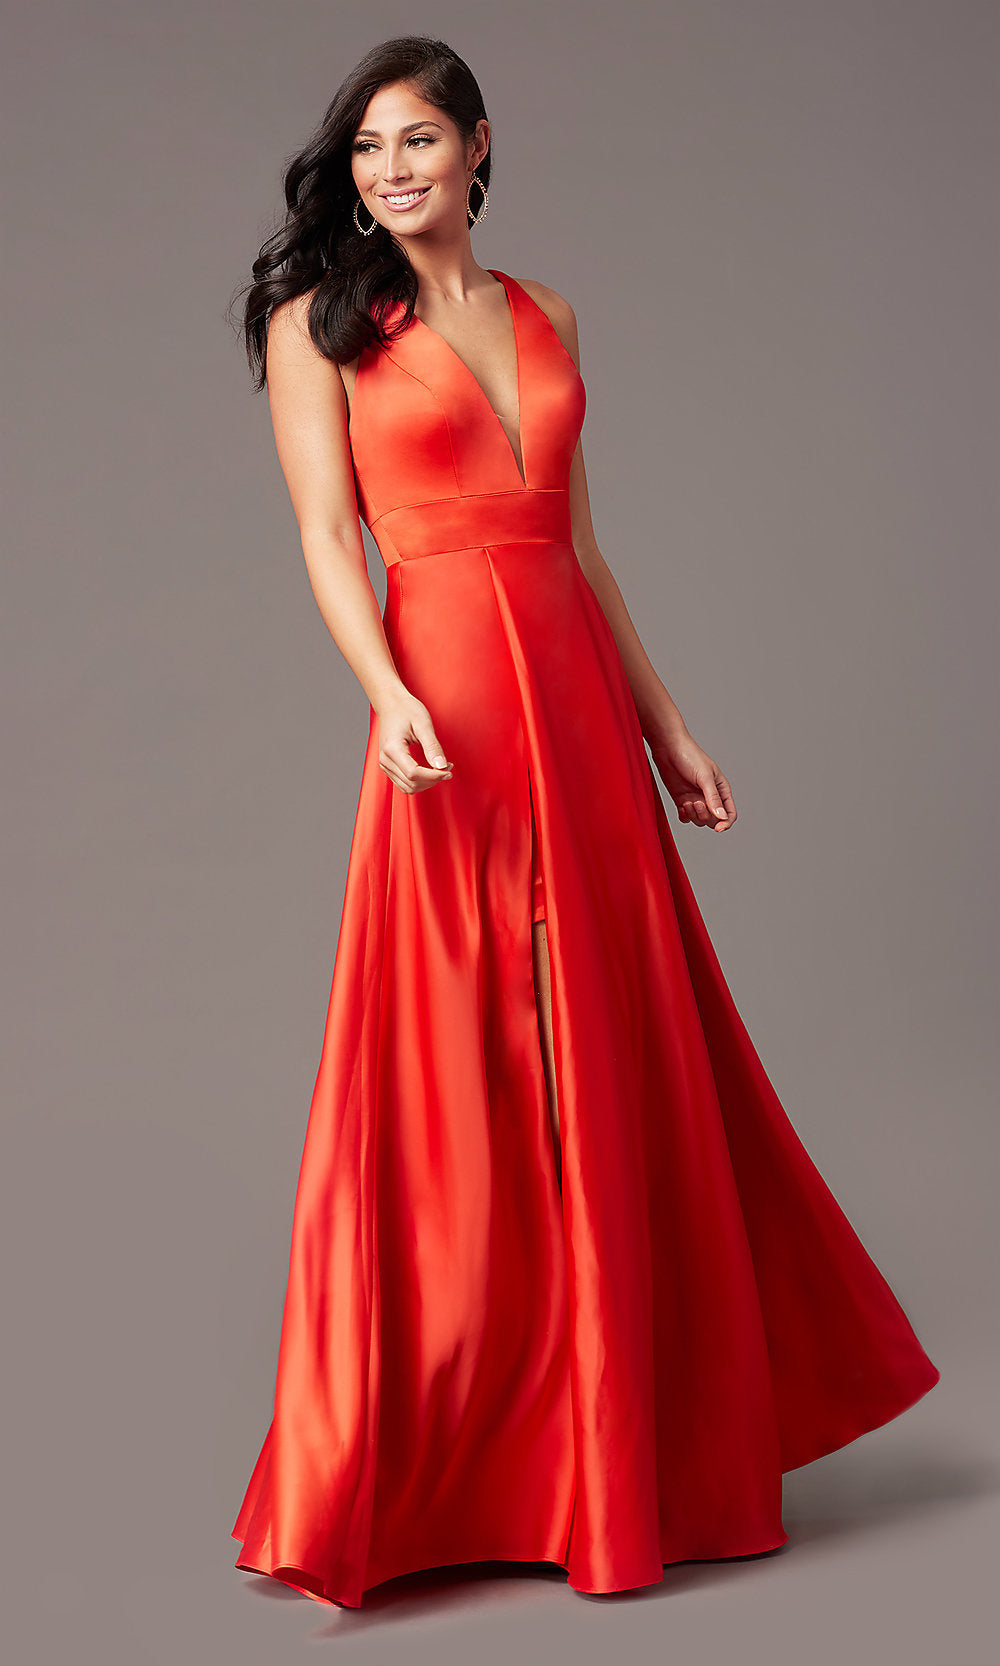 Faux-Wrap Long Deep-V-Neck Prom Dress by PromGirl